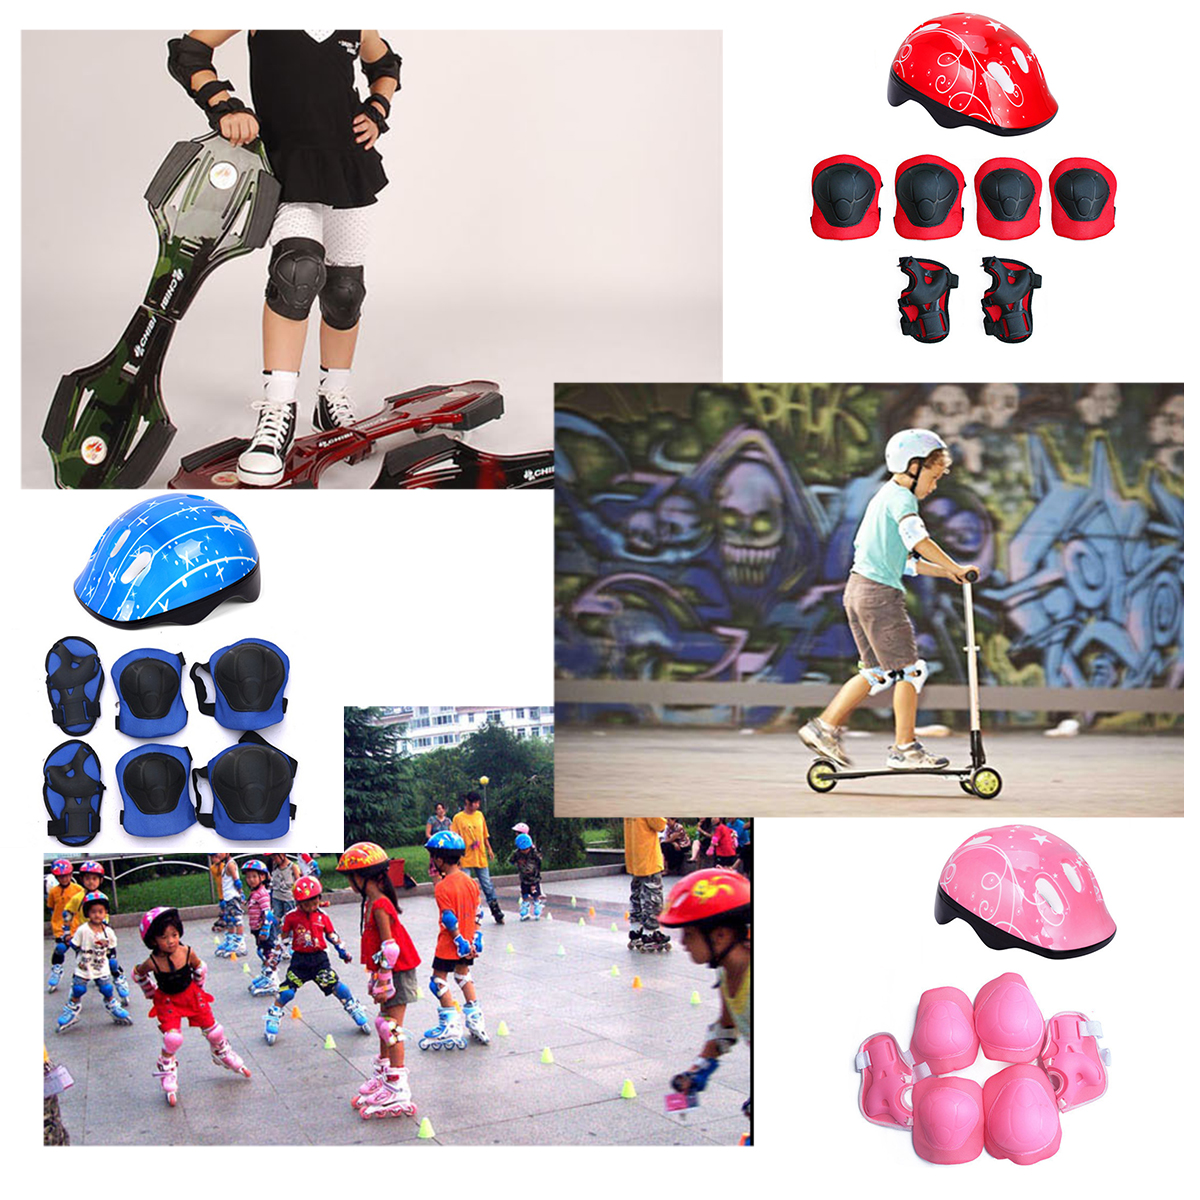 7-IN-1-Kidss-Balance-Bike-Helmet-Kits-With-Protect-Knee-Wrist-Elbow-Pads-Roller-Skating-Protective-E-1734300-6